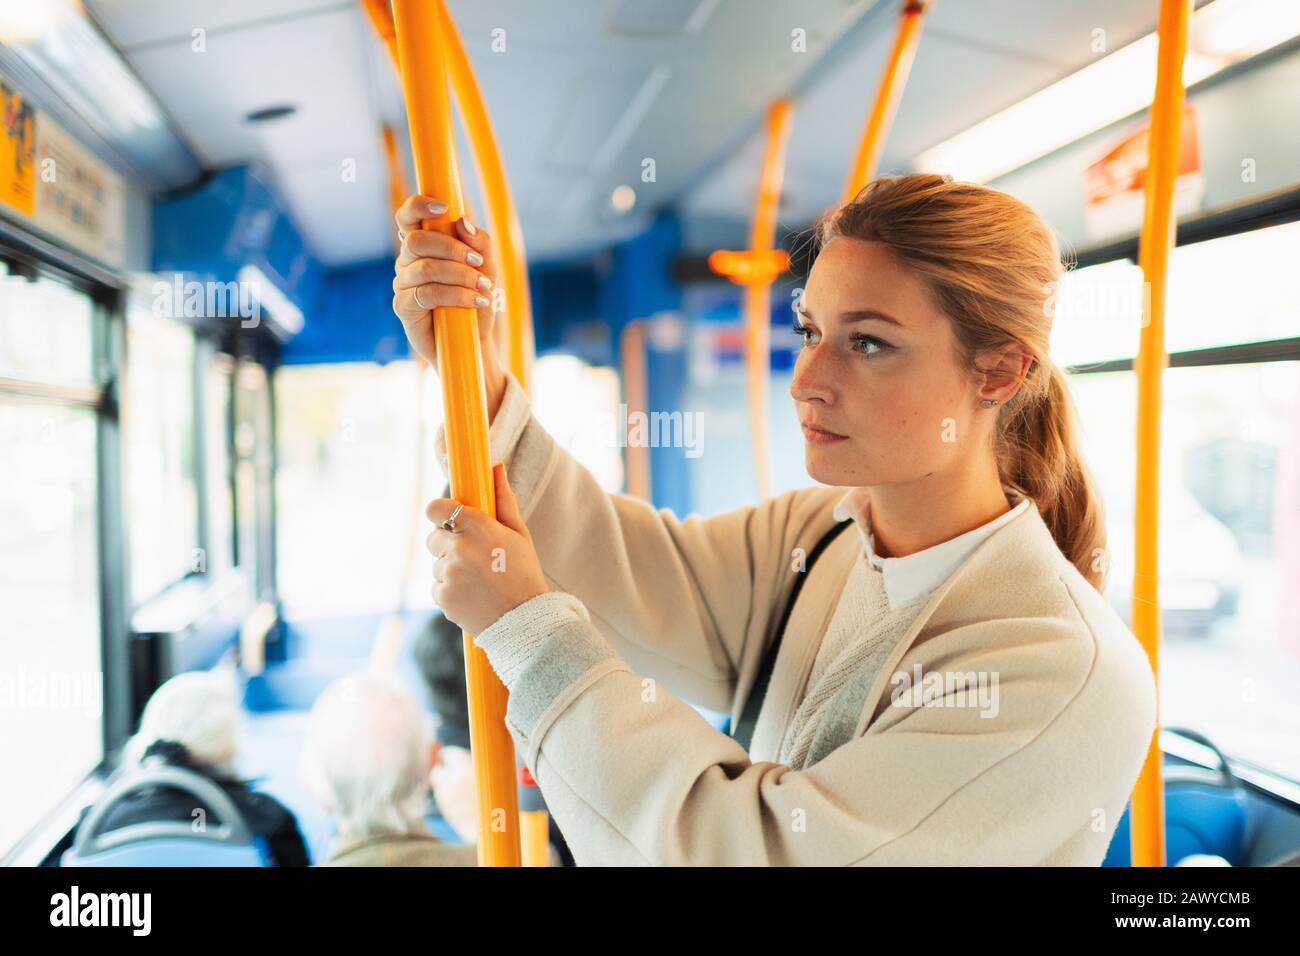 Young woman riding bus Stock Photo